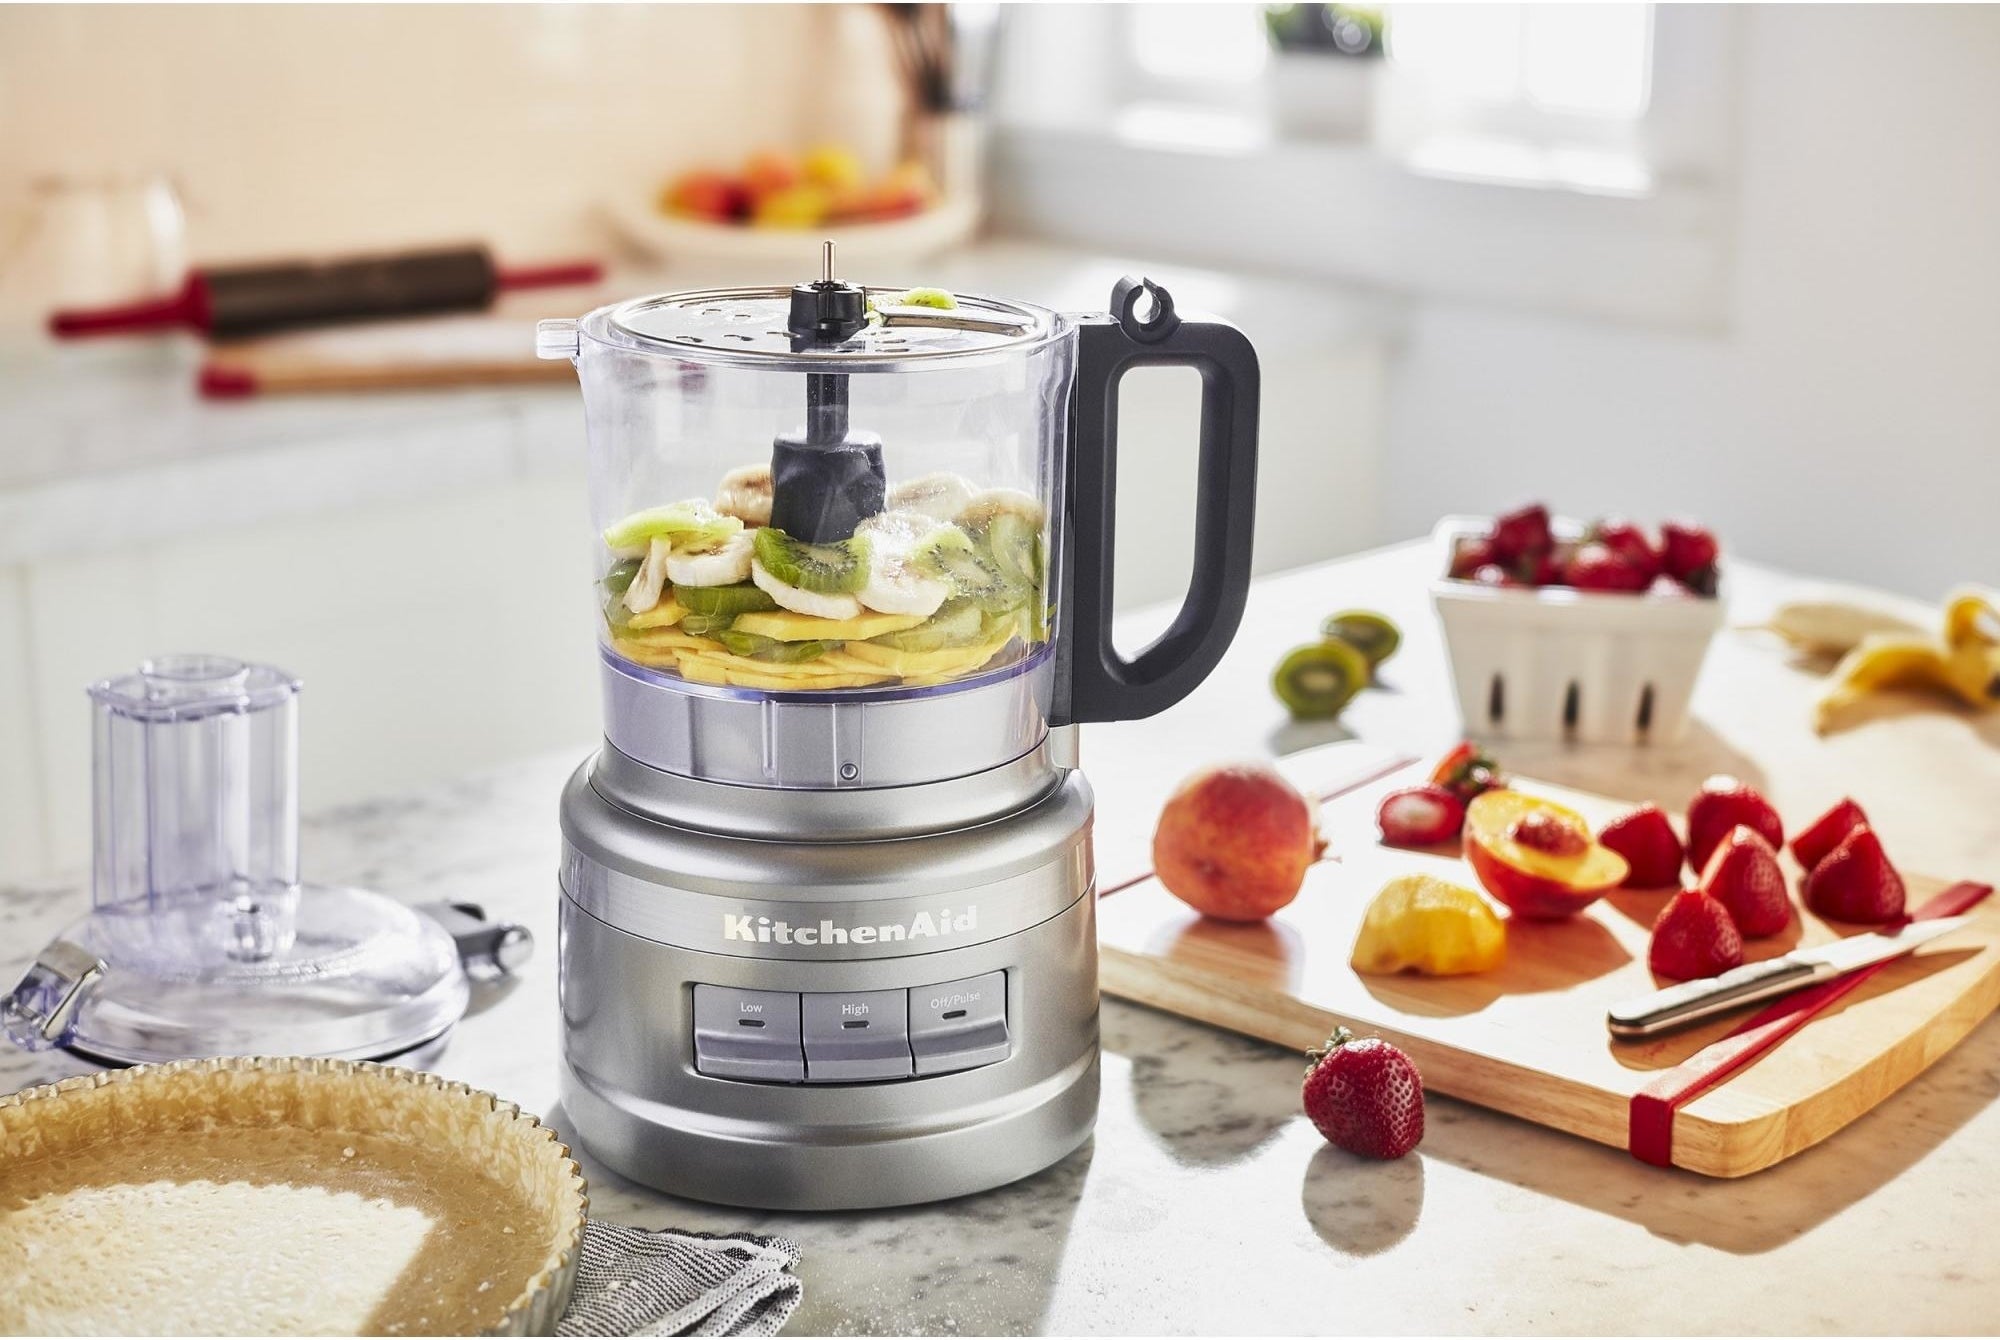 The food processor in a kitchen, full of fruits